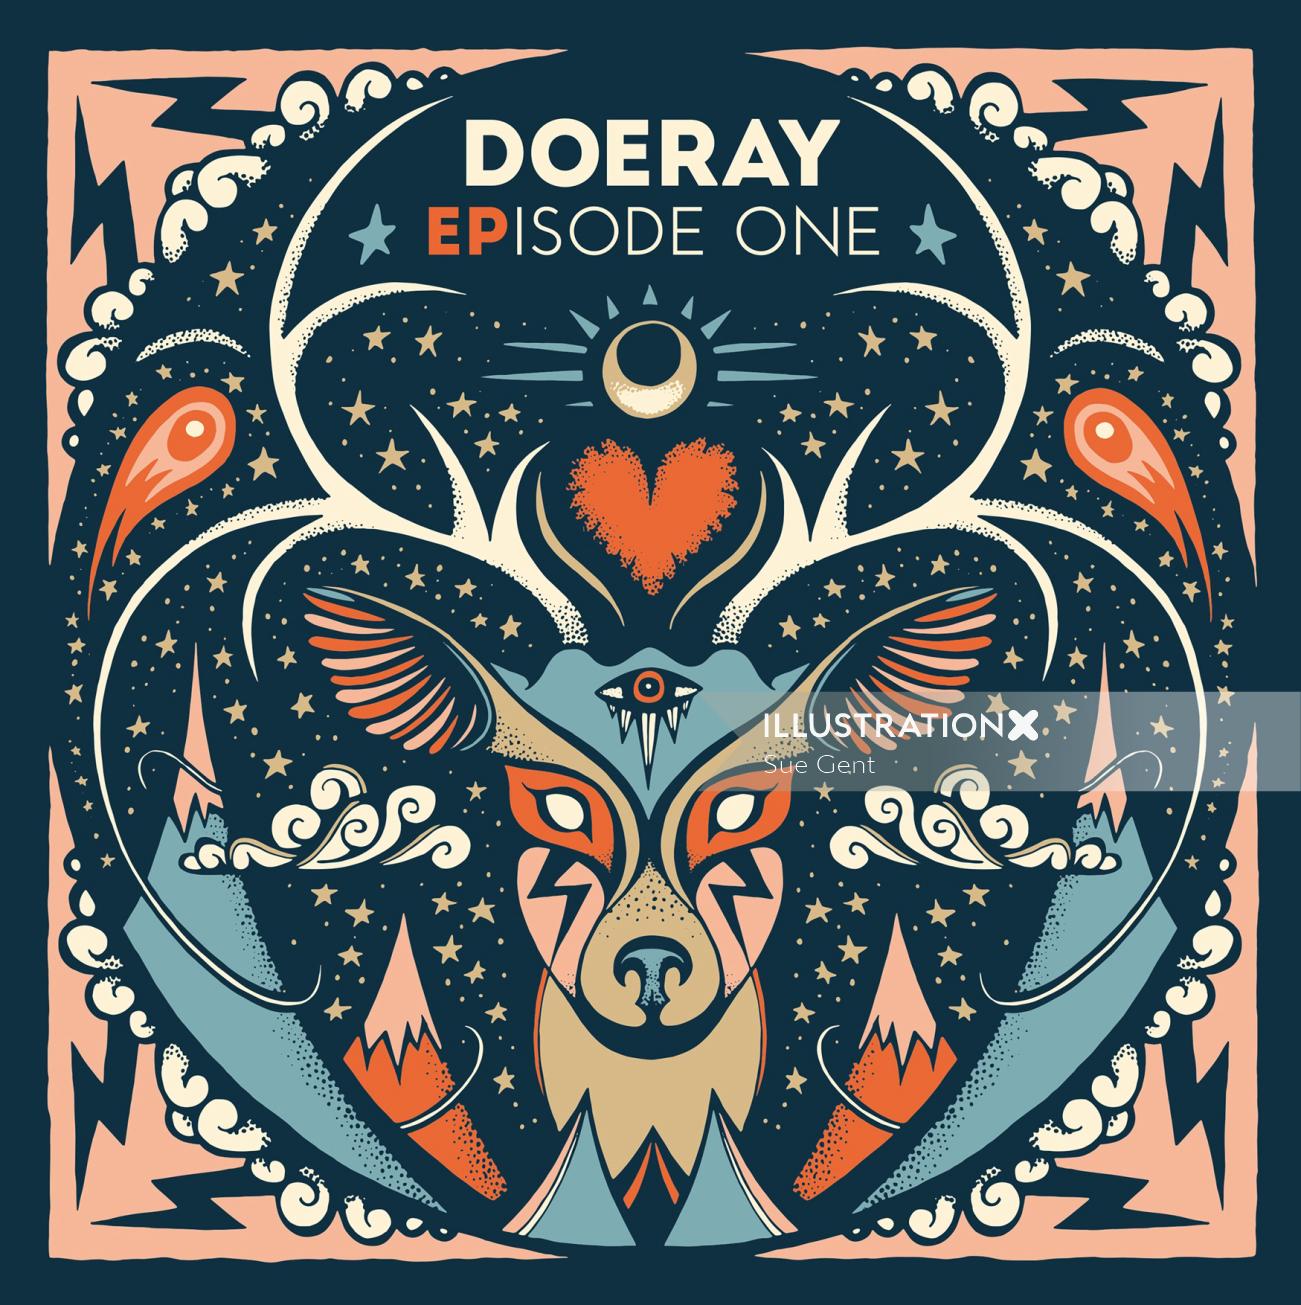 Doeray episode one cover